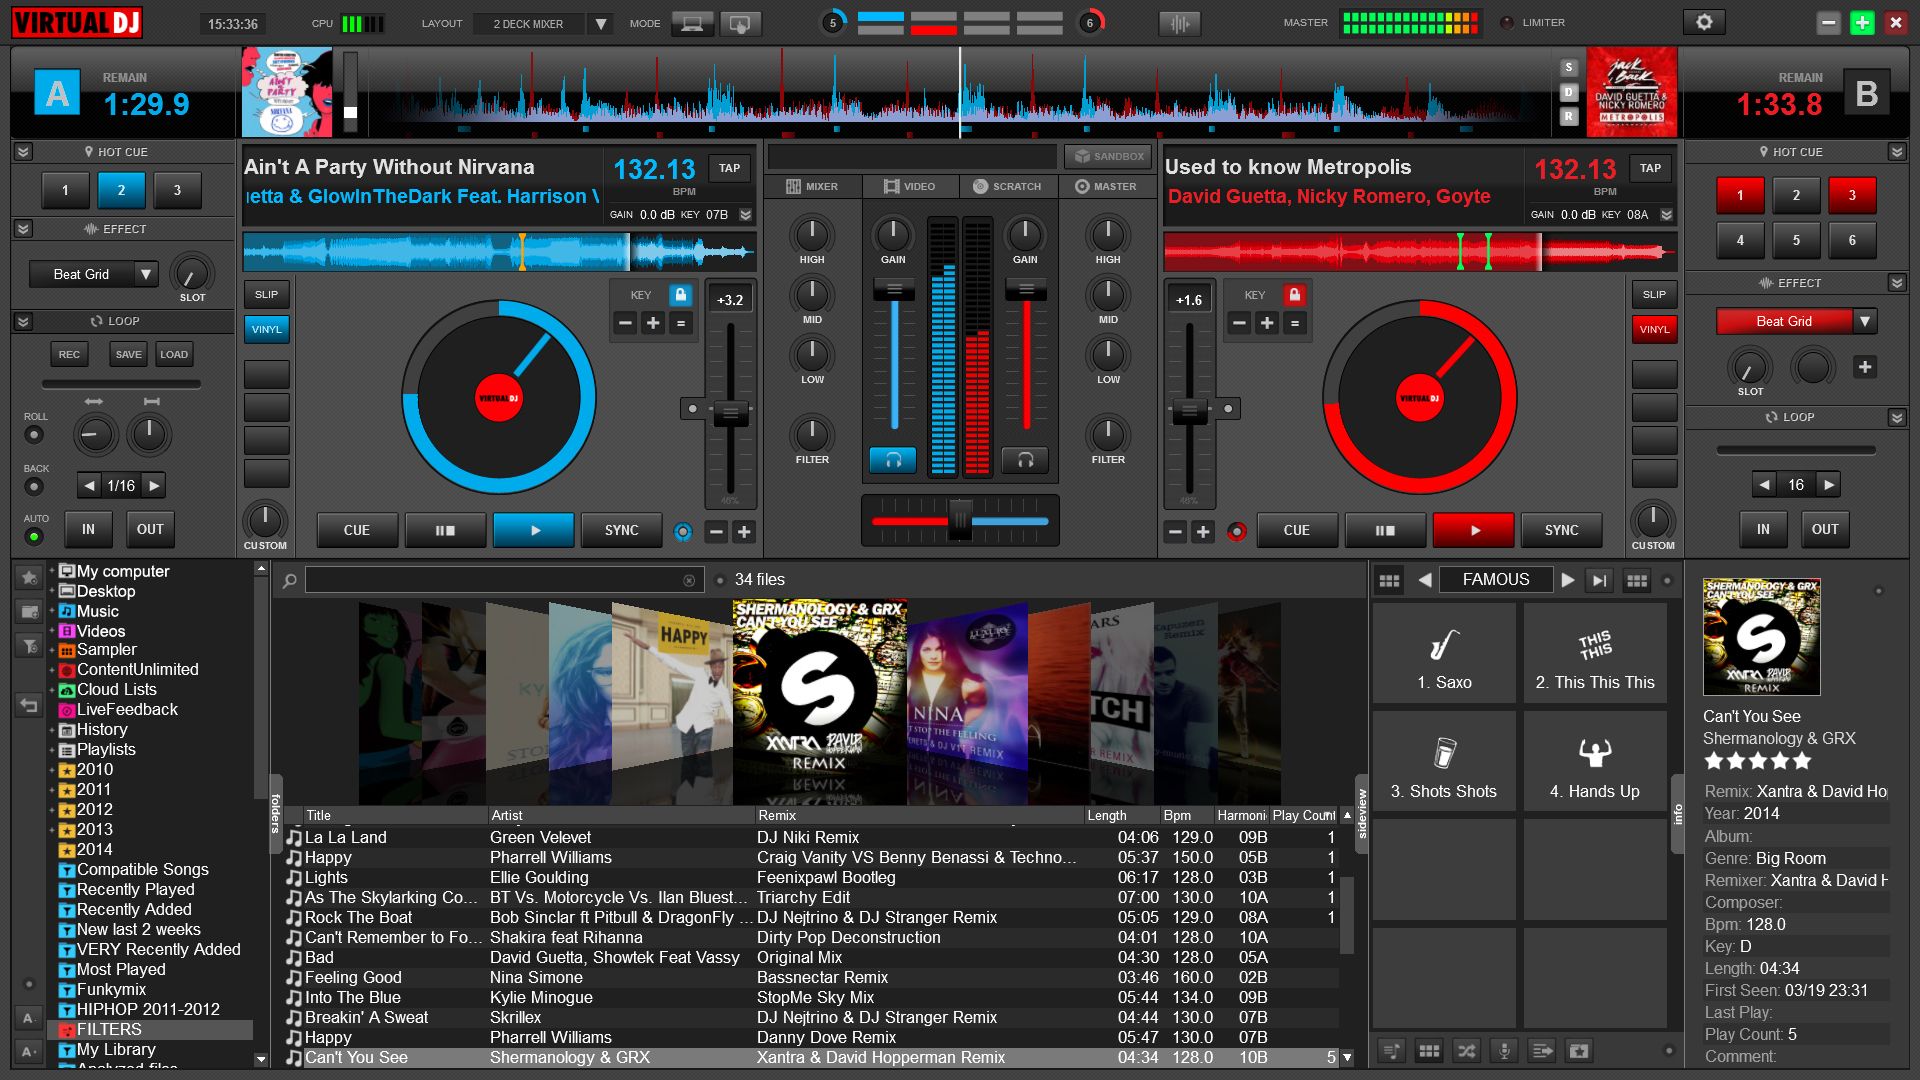 Numark mixtrack pro 3 mapping for virtual dj downloads